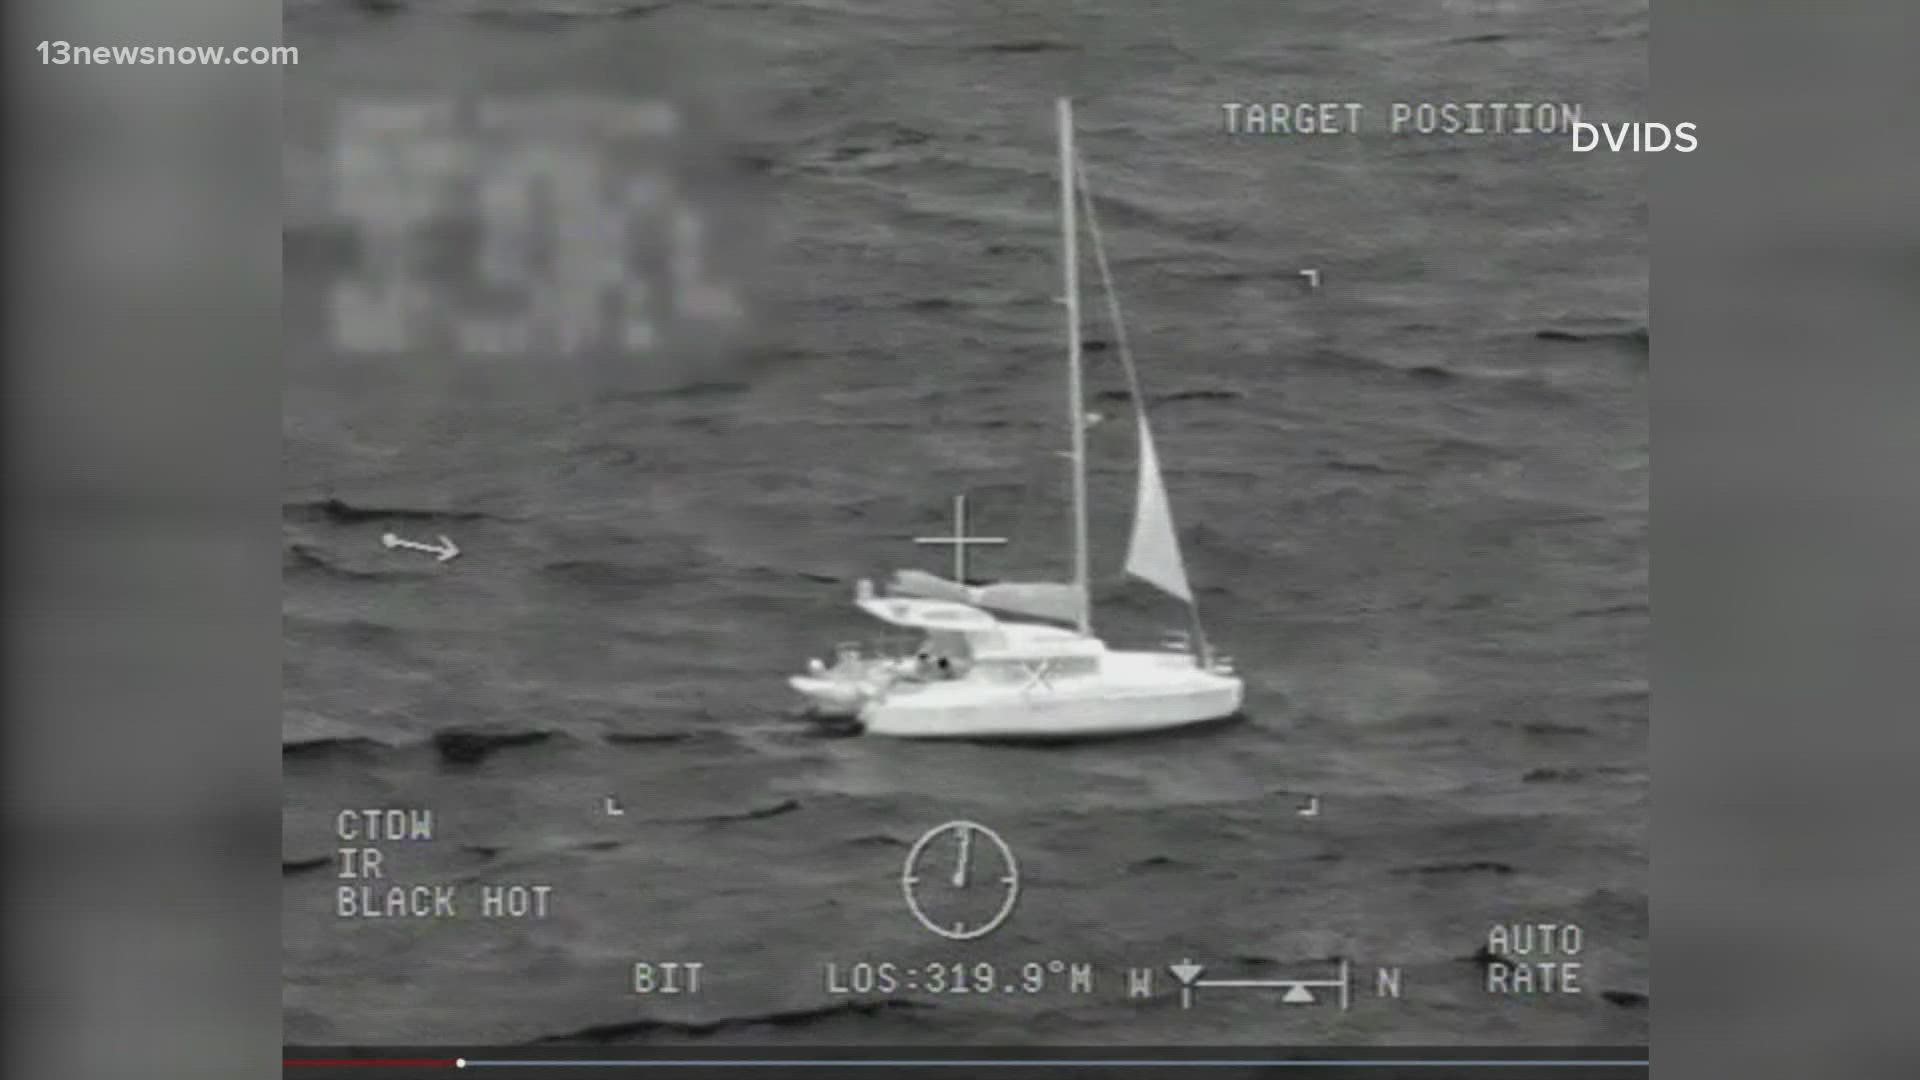 A helicopter crew responded and rescued the three adults and one 15-year-old aboard the sinking vessel.